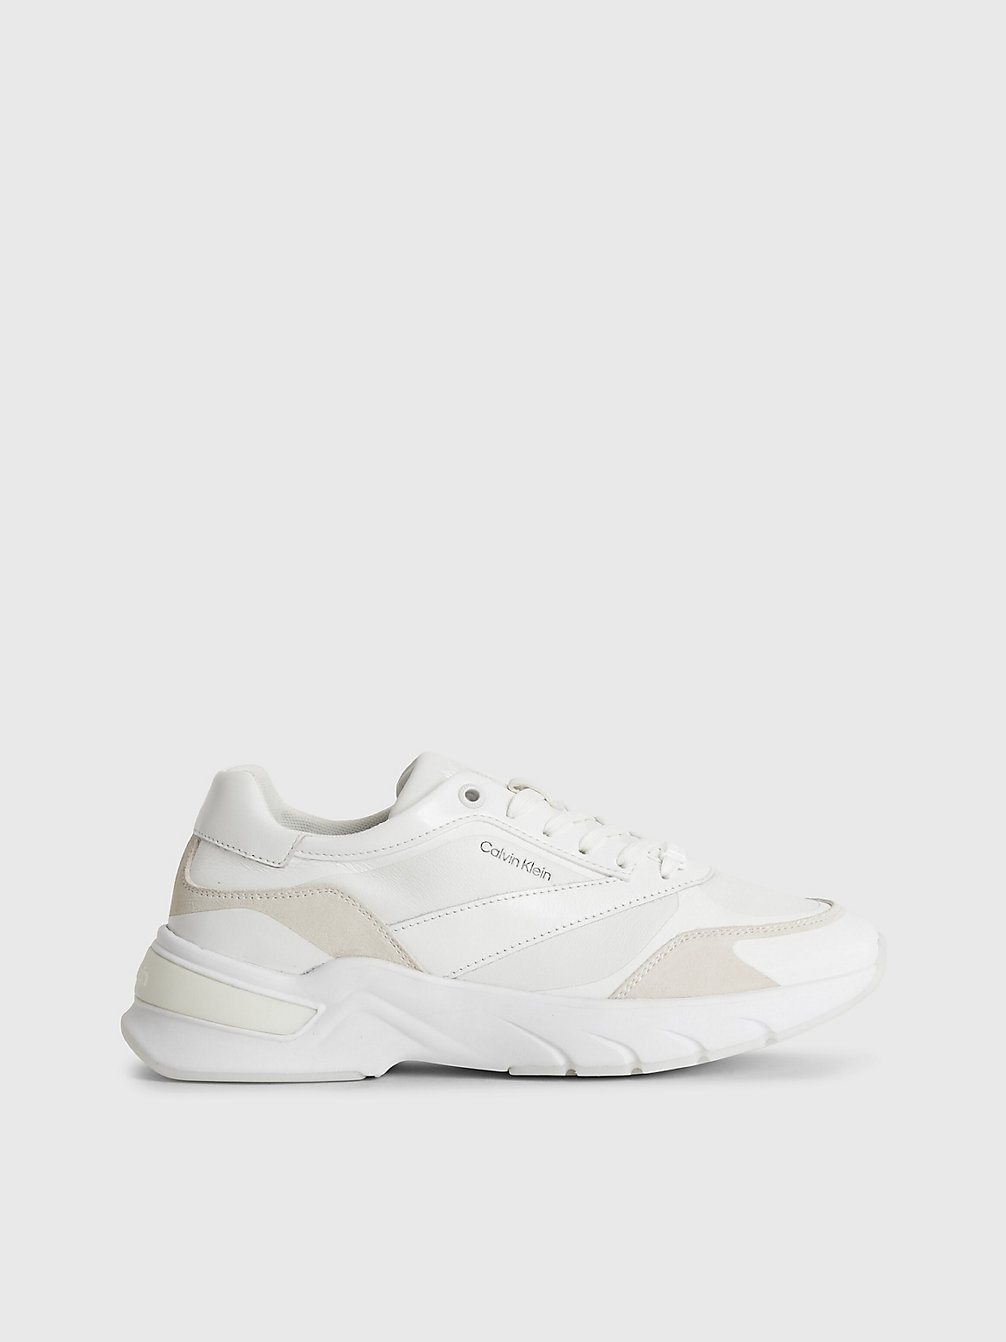 BRIGHT WHITE Leather Trainers undefined women Calvin Klein